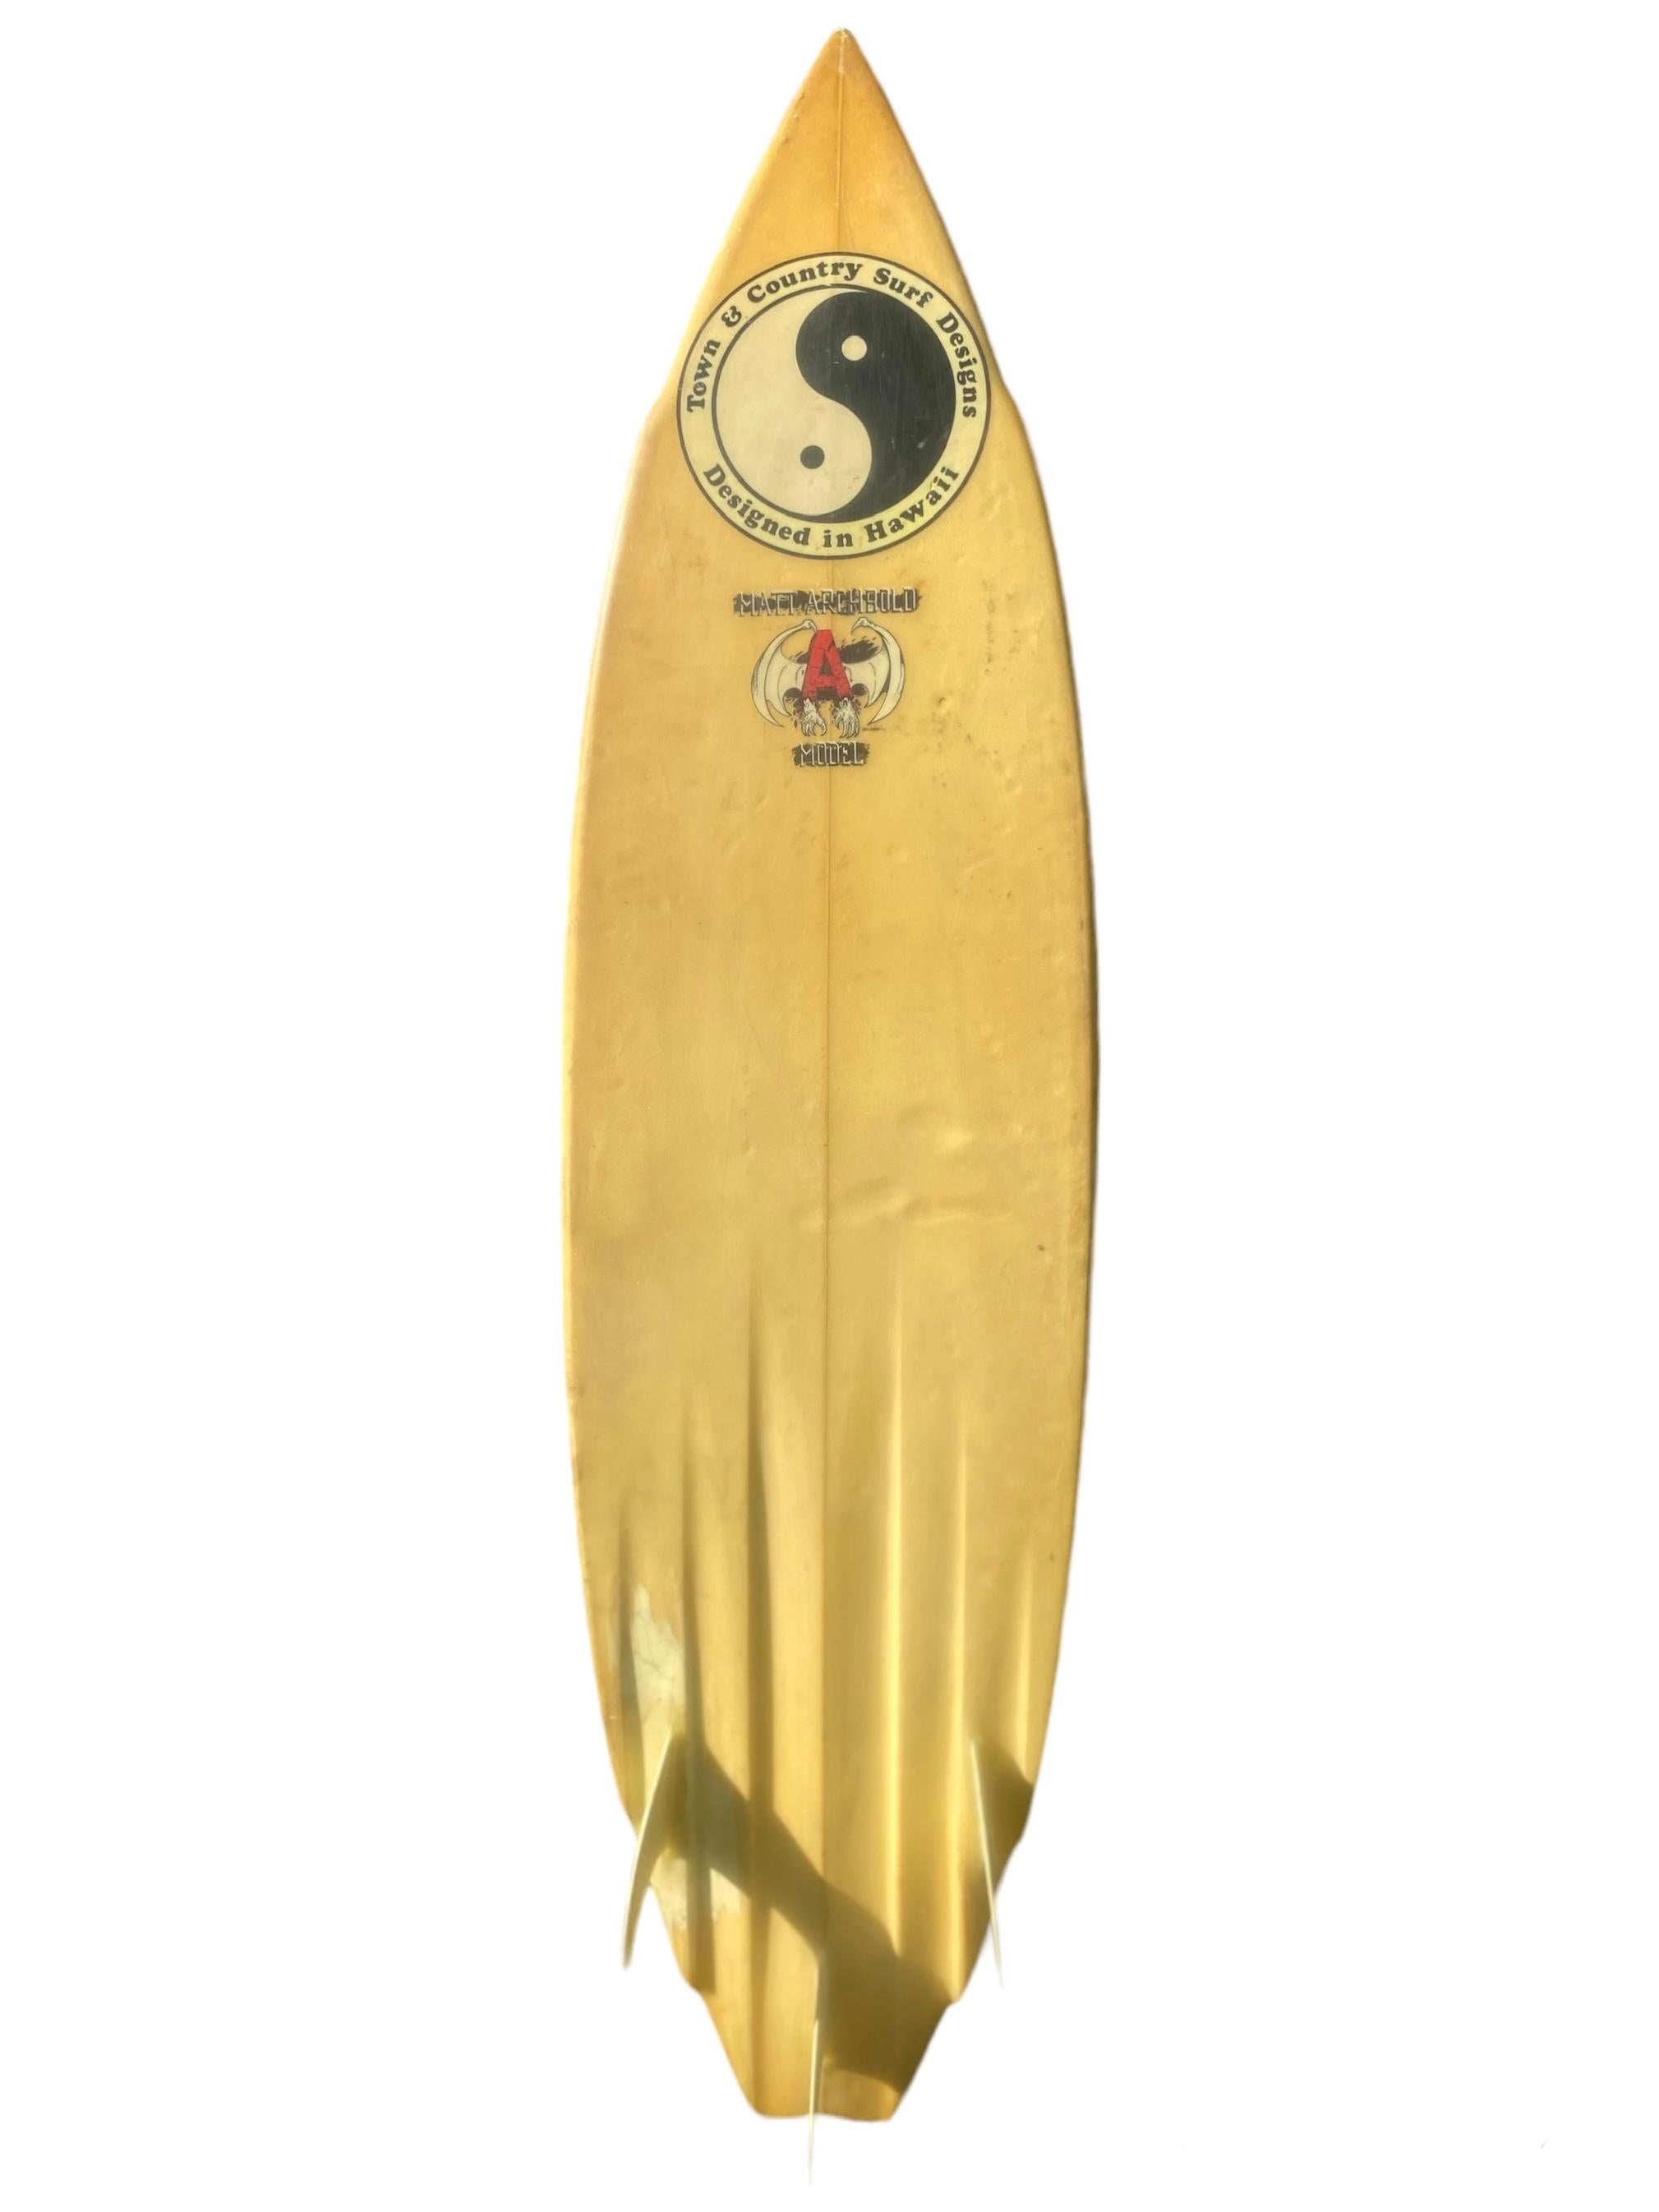 1987 Vintage Matt “Archy” Archbold personal surfboard. Made under the renowned Town & Country Surfboards label by T. Patterson. Features airbrushed original artwork by Izzy Paskowitz of a Pawnee Native American Indian. Uncommon nose-wing shape